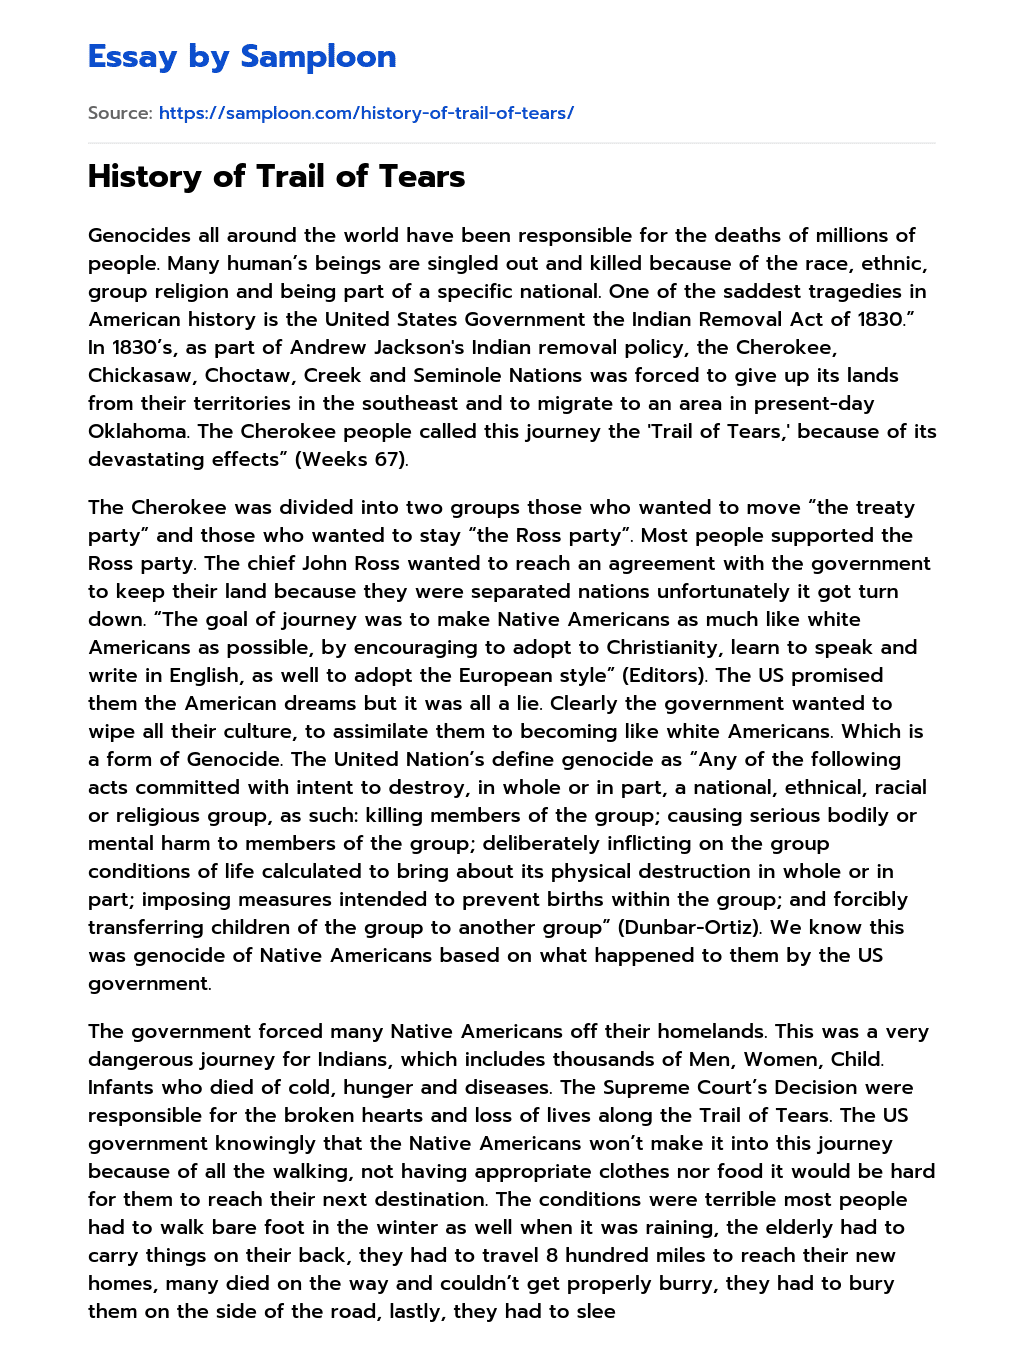 History of Trail of Tears essay